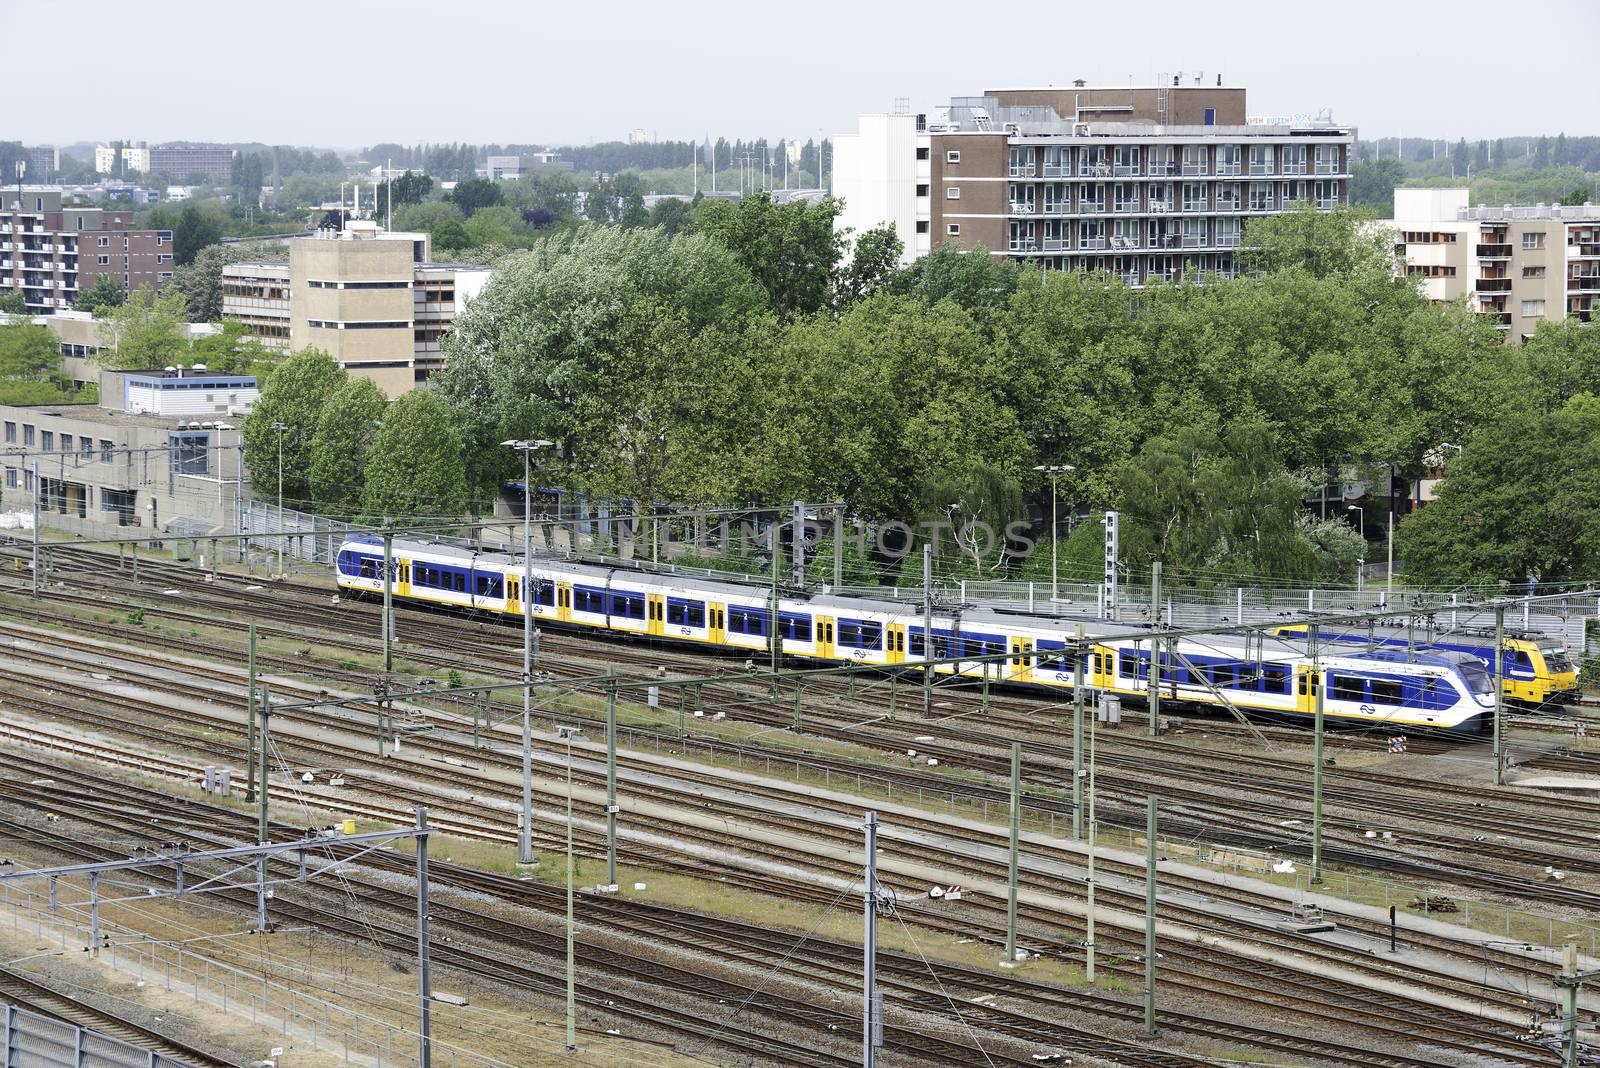 train leaving central station Rotterdam  by compuinfoto